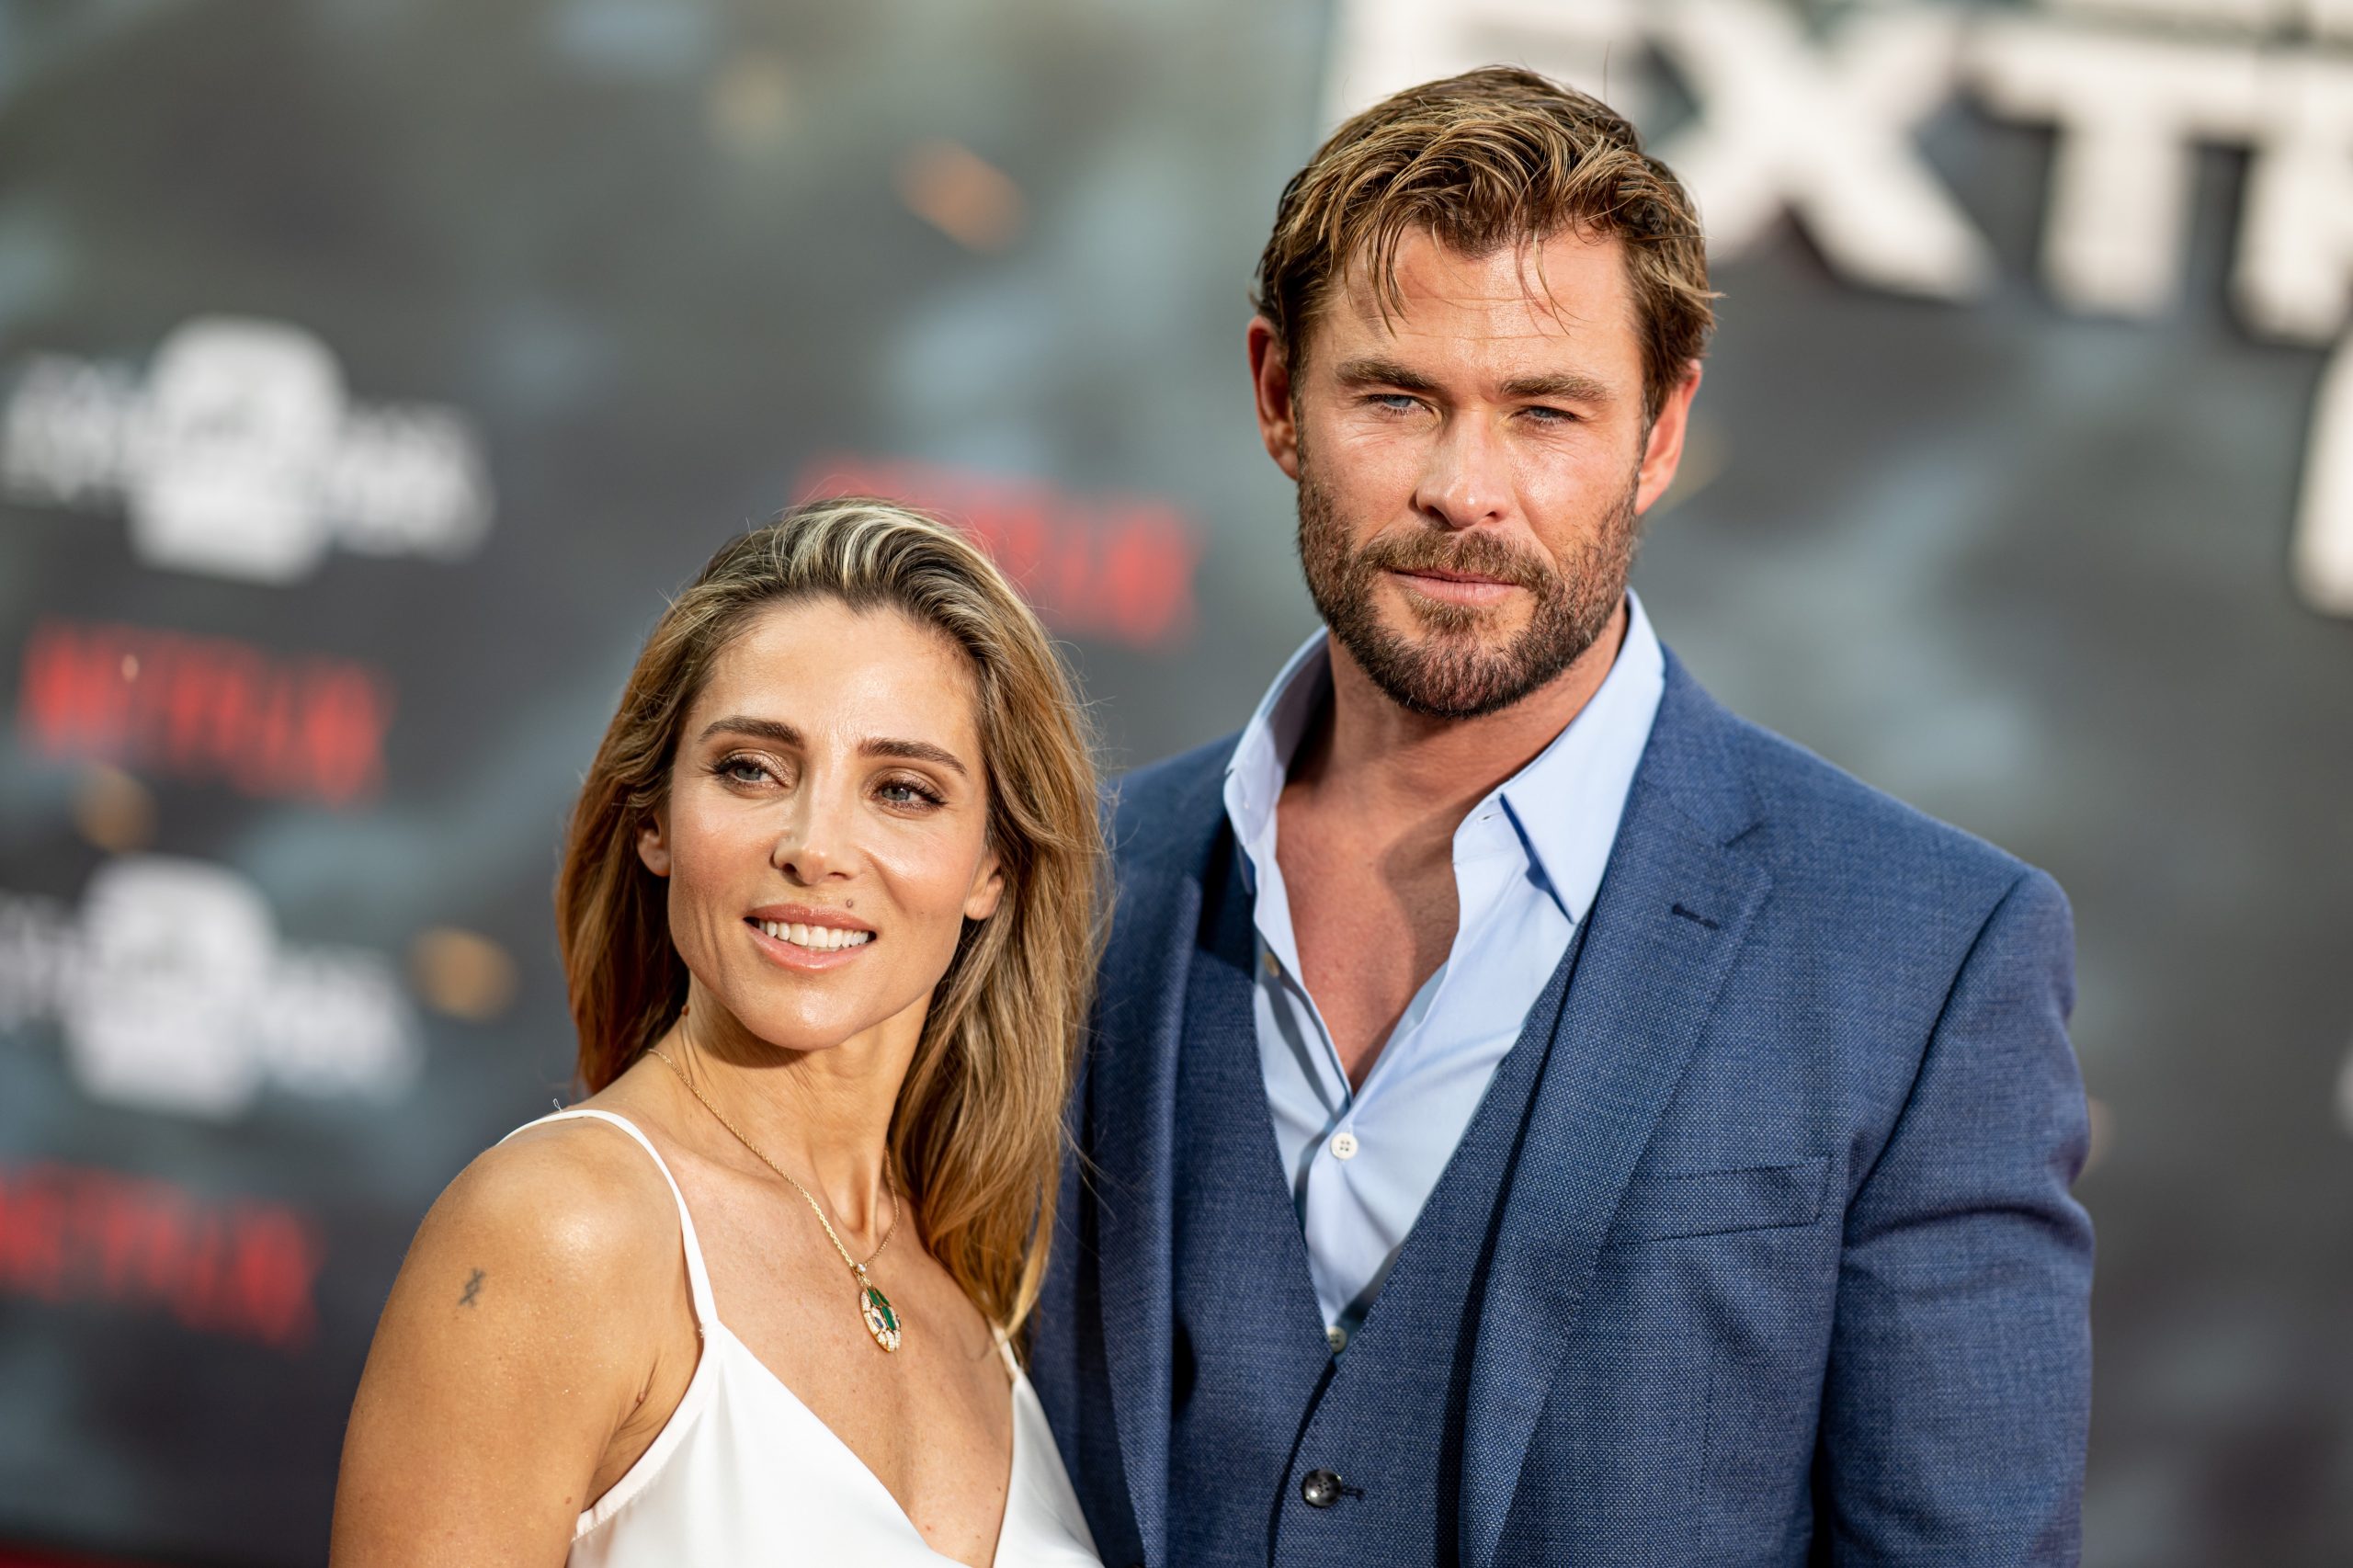 Chris Hemsworth, actor, and his wife Elsa Pataky, actress, arrive at a special screening of the movie "Tyler Rake: Extraction 2." The action film "Tyler Rake: Extraction 2" will be made available via Netflix starting June 16, 2023.